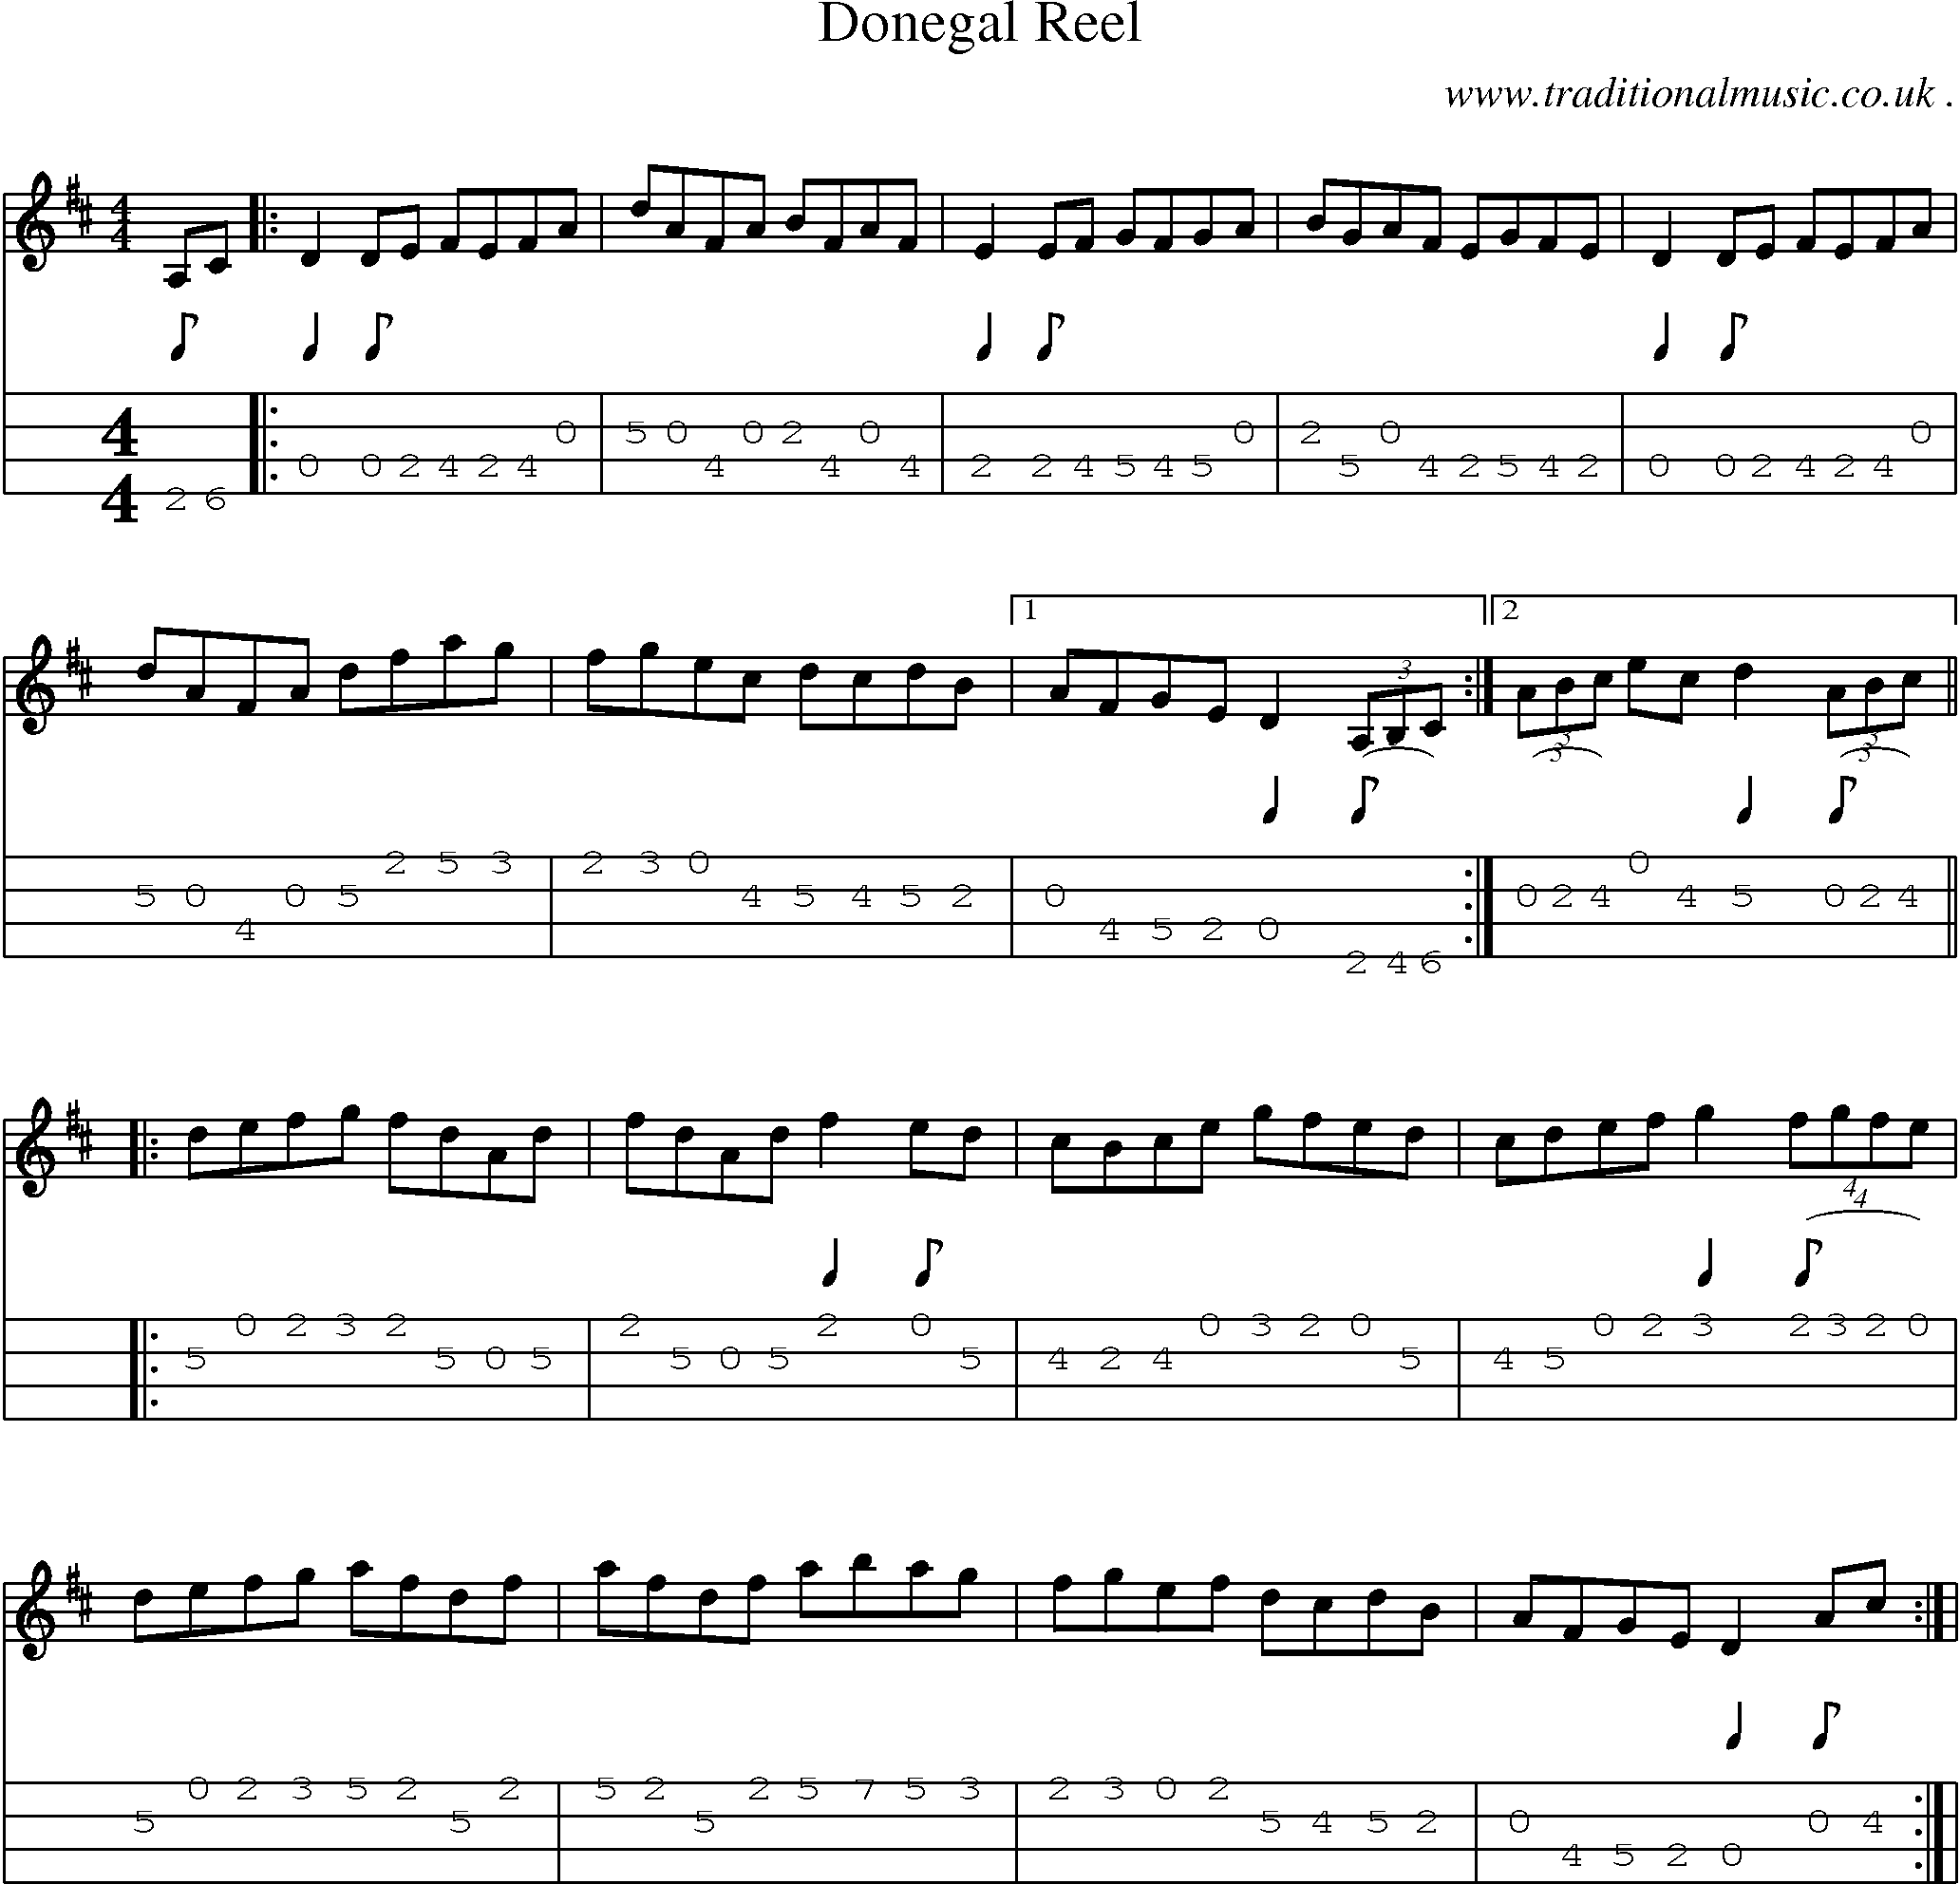 Music Score and Guitar Tabs for Donegal Reel